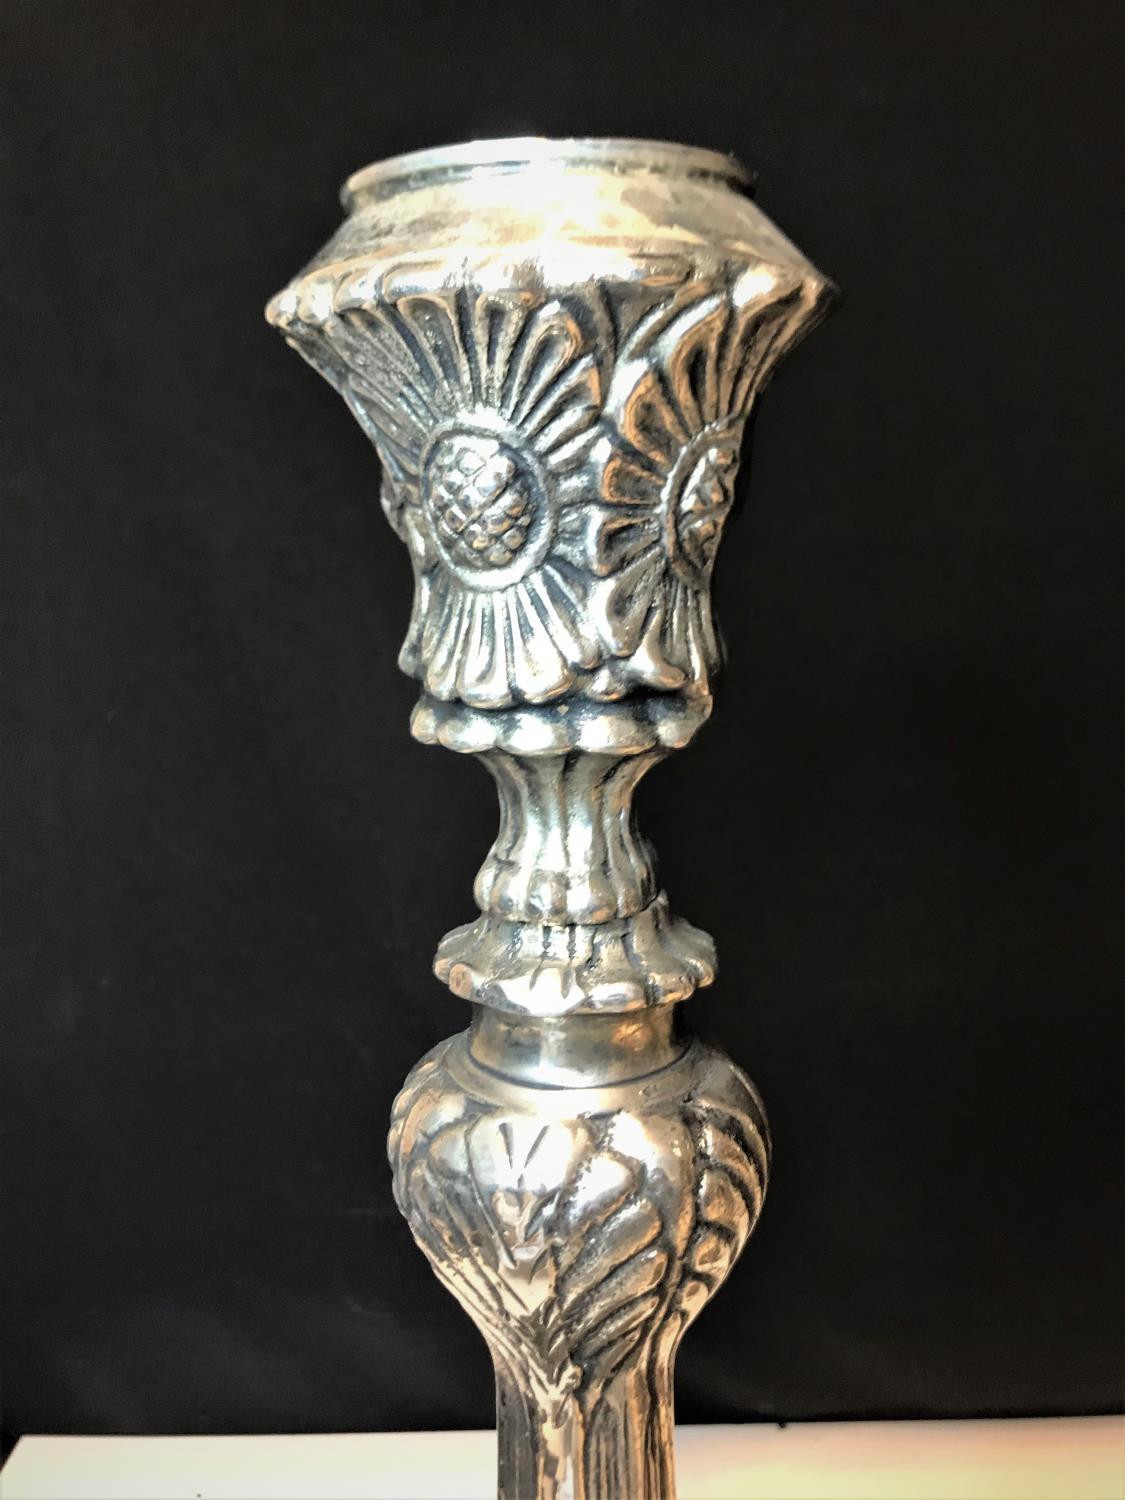 A pair of large ornate silver plate candlesticks circa 1930, with a weight of 5.7kg - Image 2 of 5